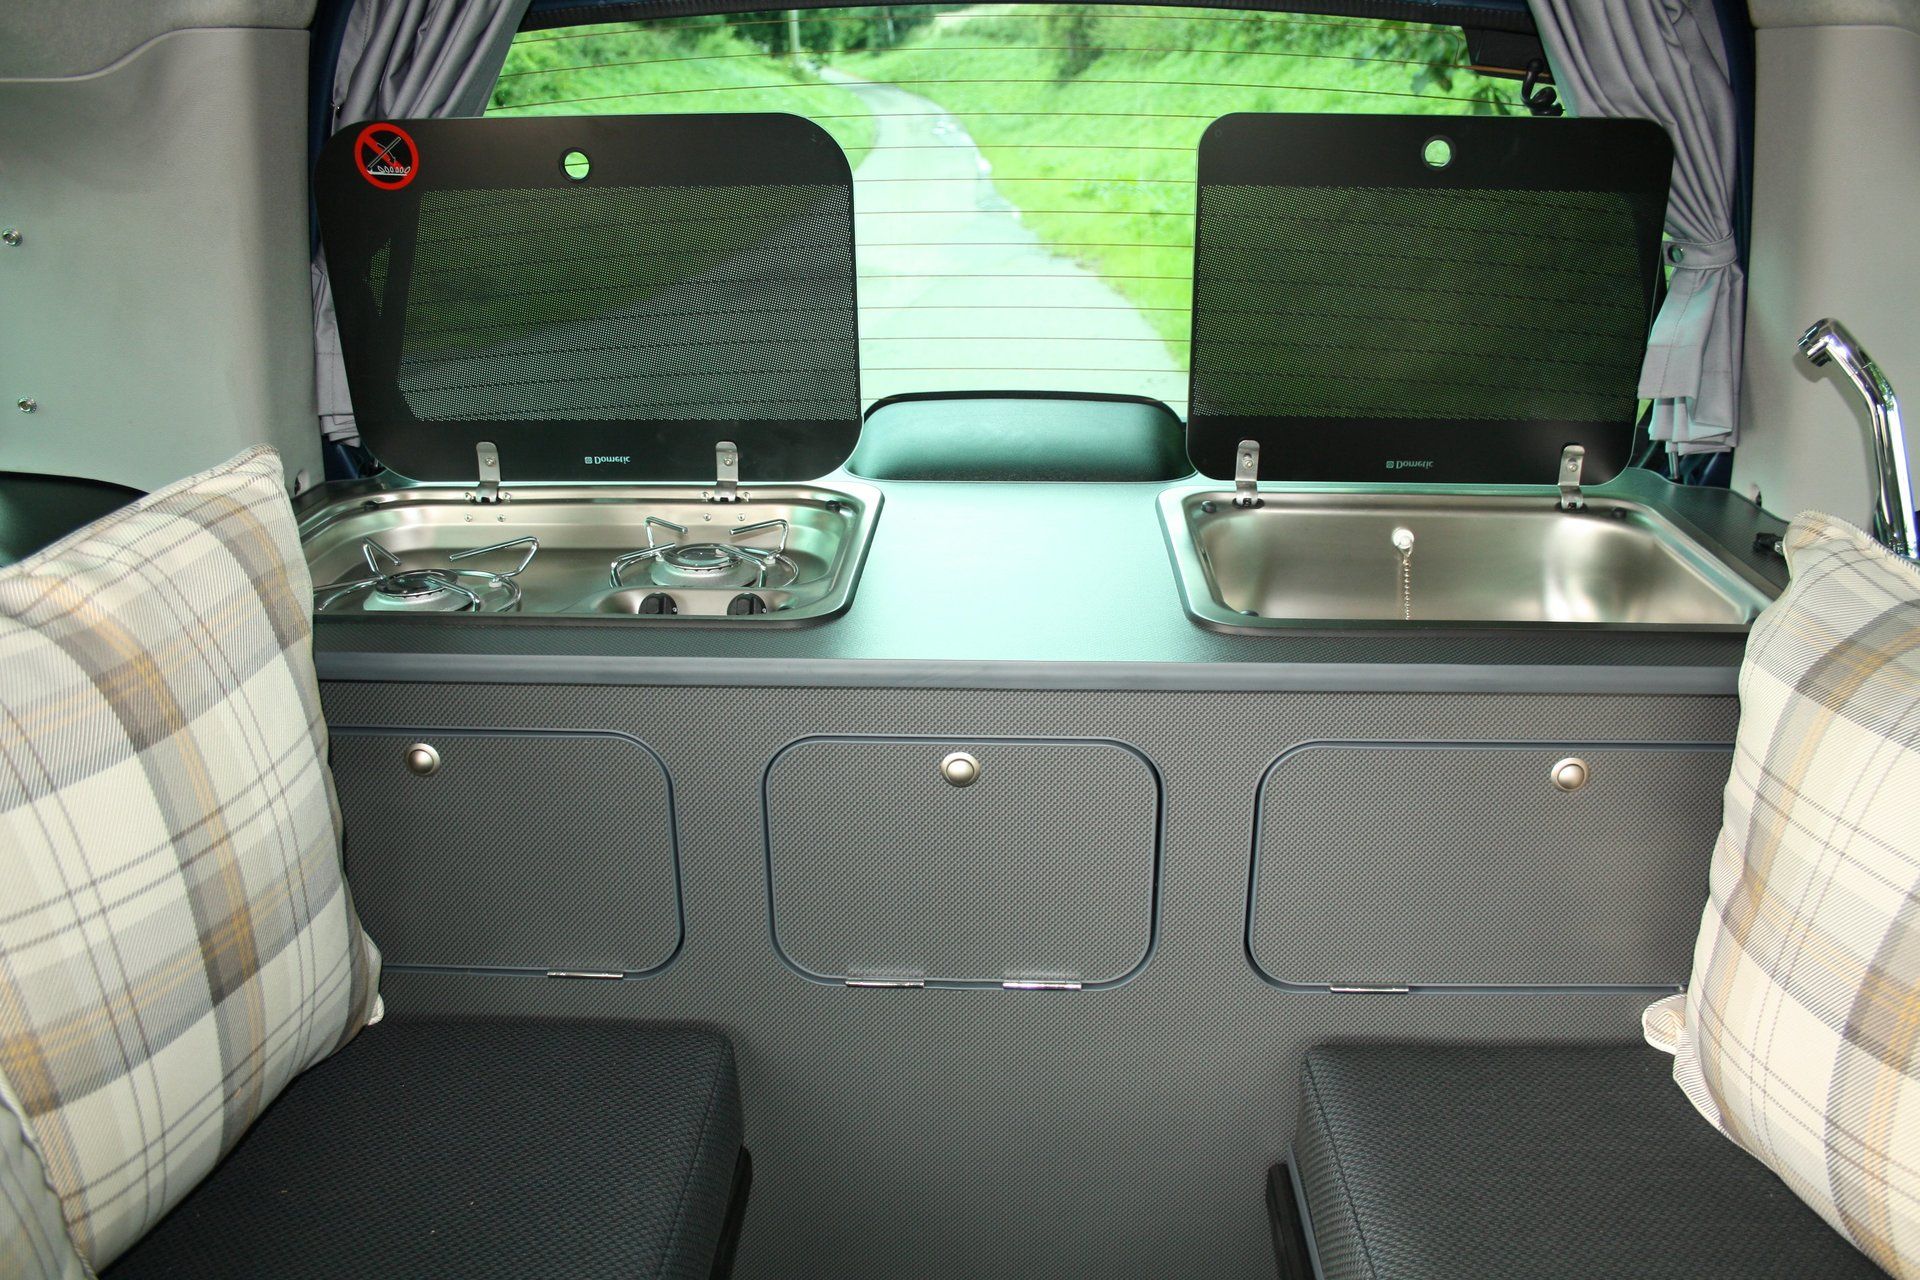 Cooker and sink unit inside converted Berlingo by Chapel Motorhomes